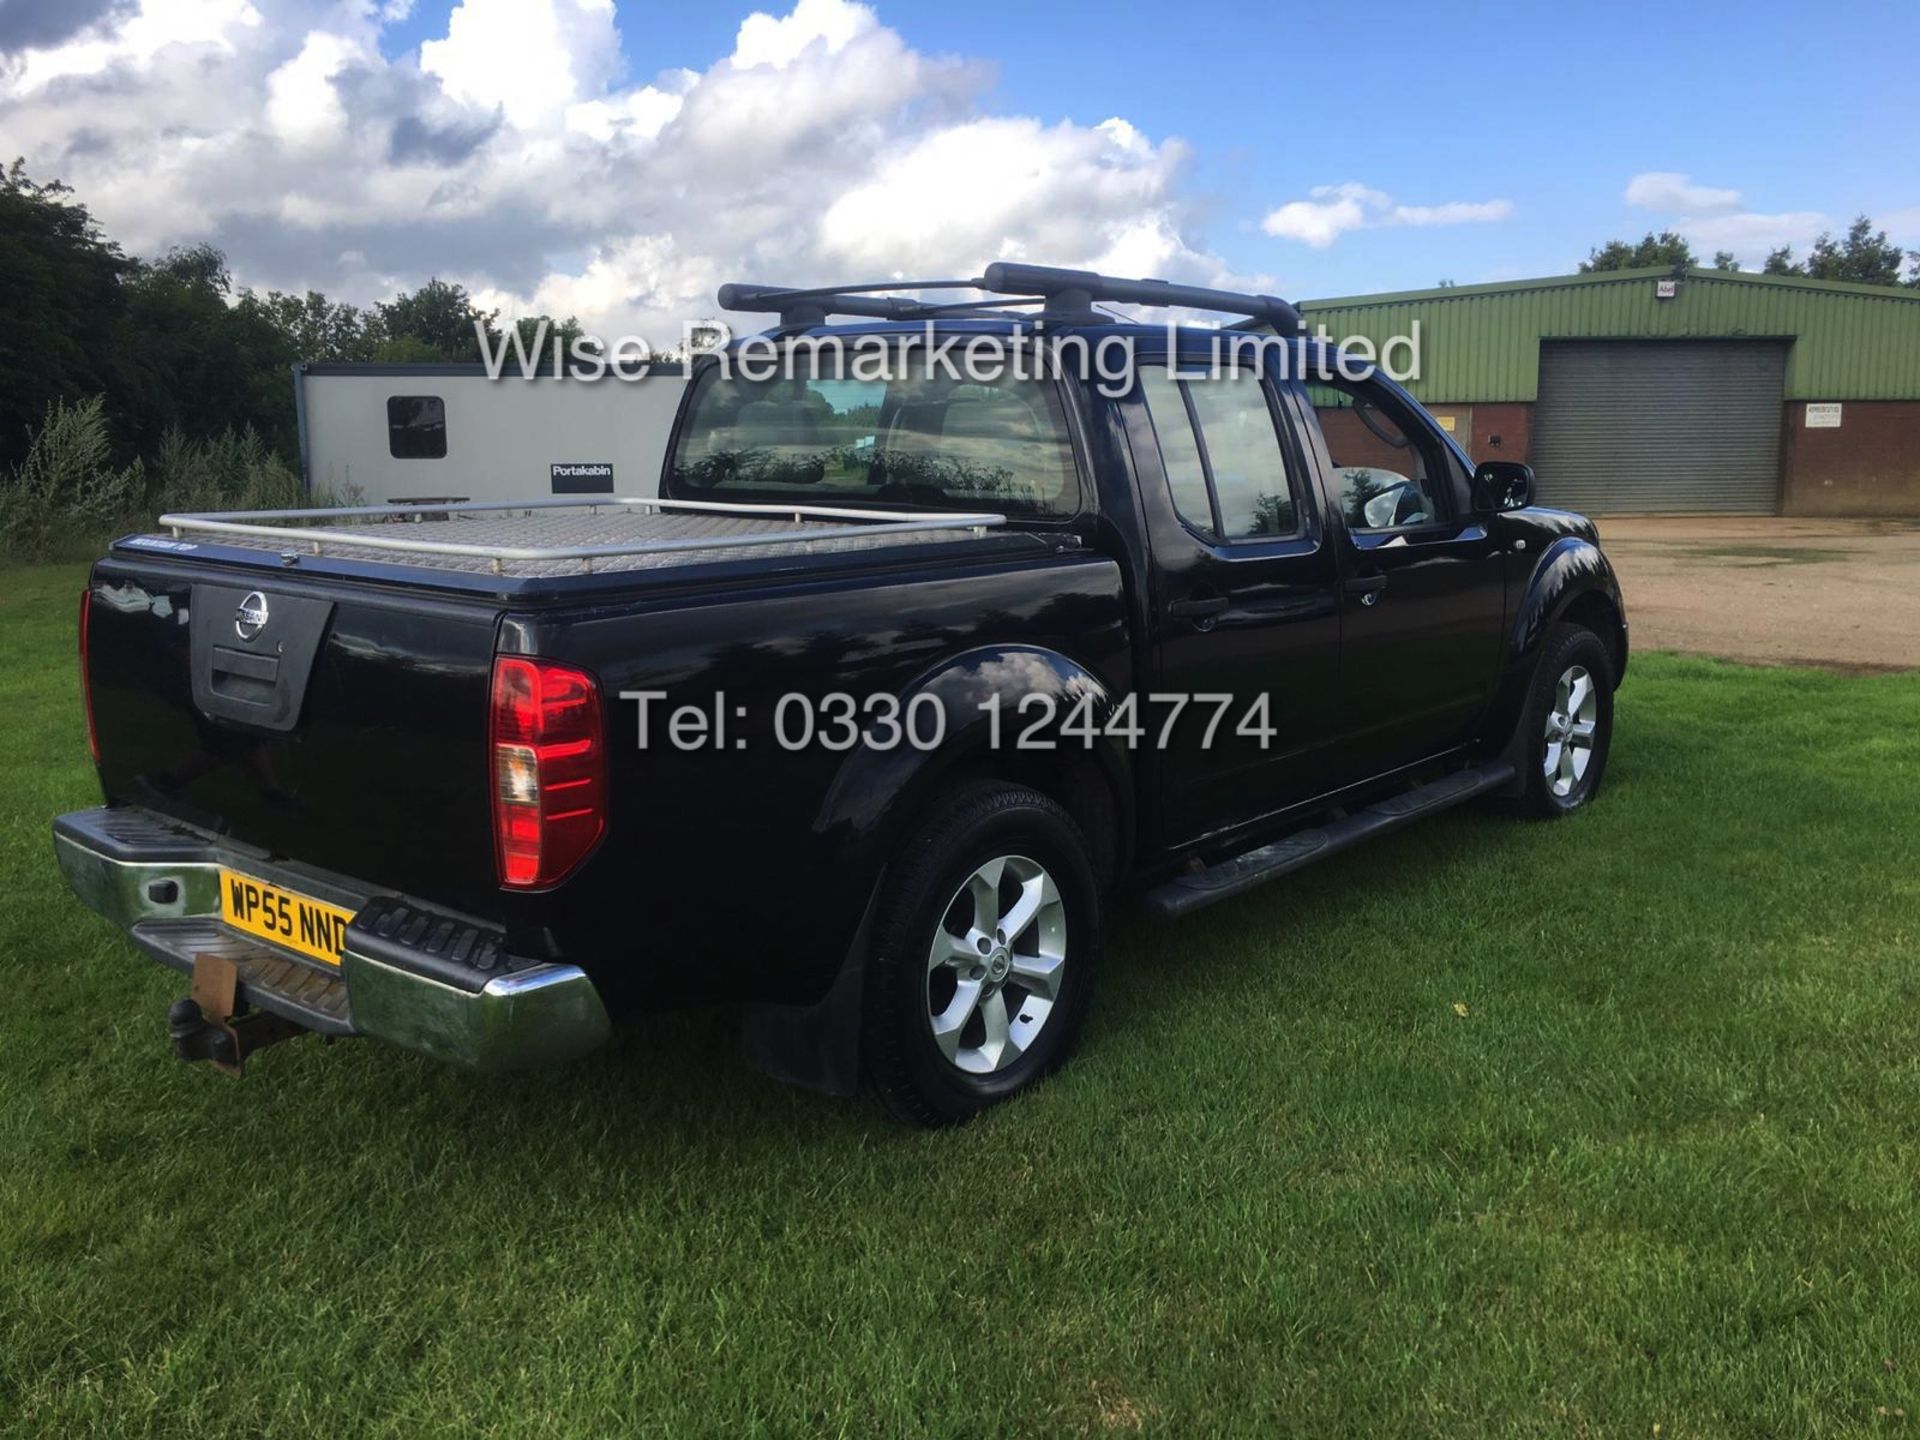 NISSAN NAVARA 2.5 DCI SE DOUBLE CAB PICK UP 4X4 (2006) LOADS OF HISTORY - Image 2 of 11